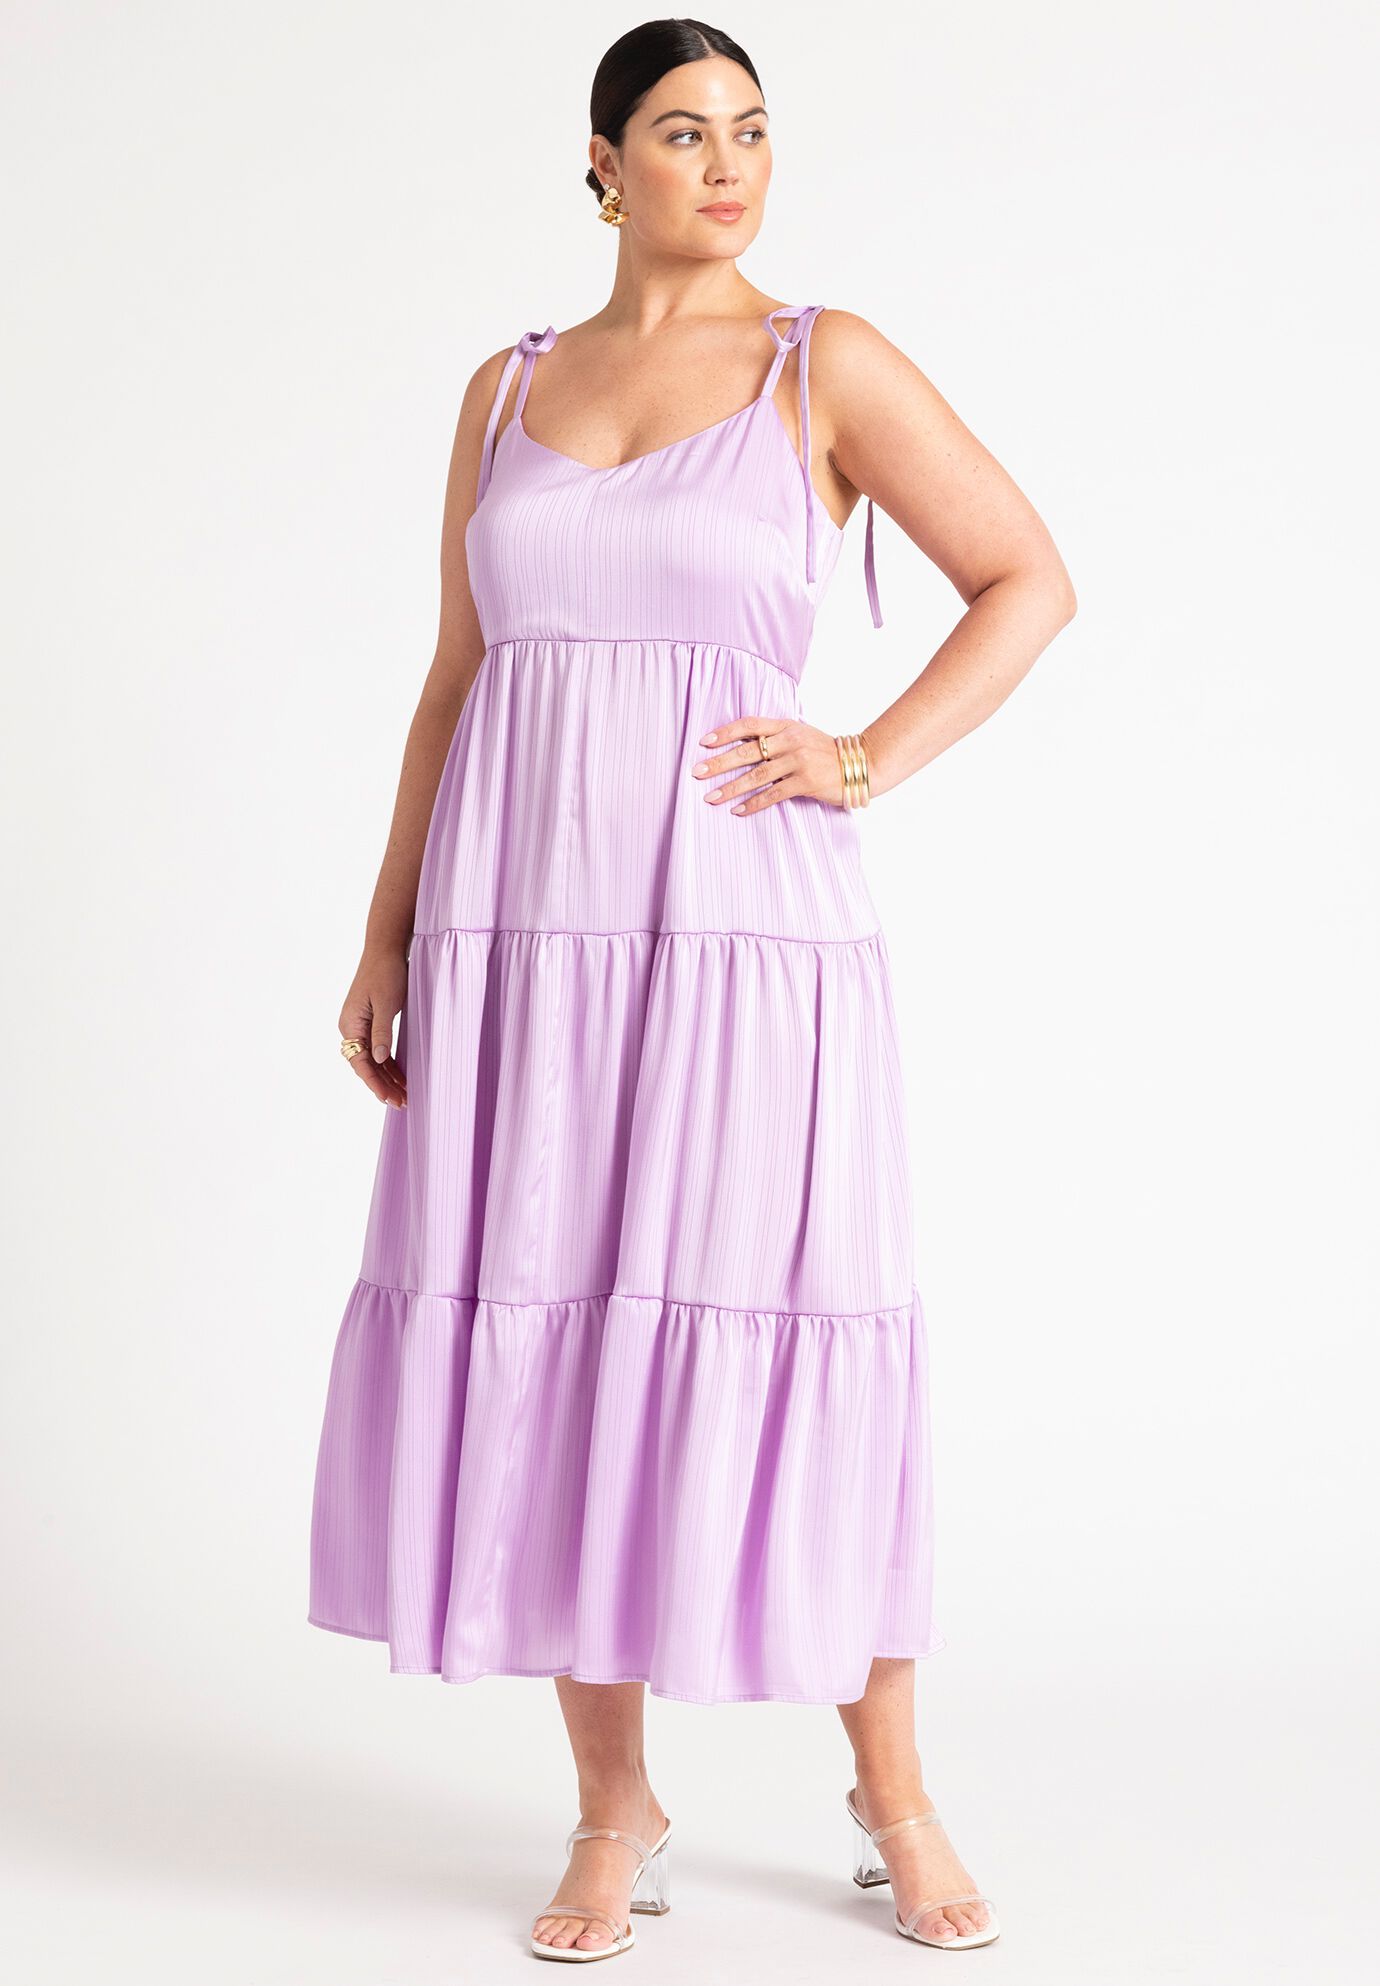 Pocketed Tiered Dress by Eloquii